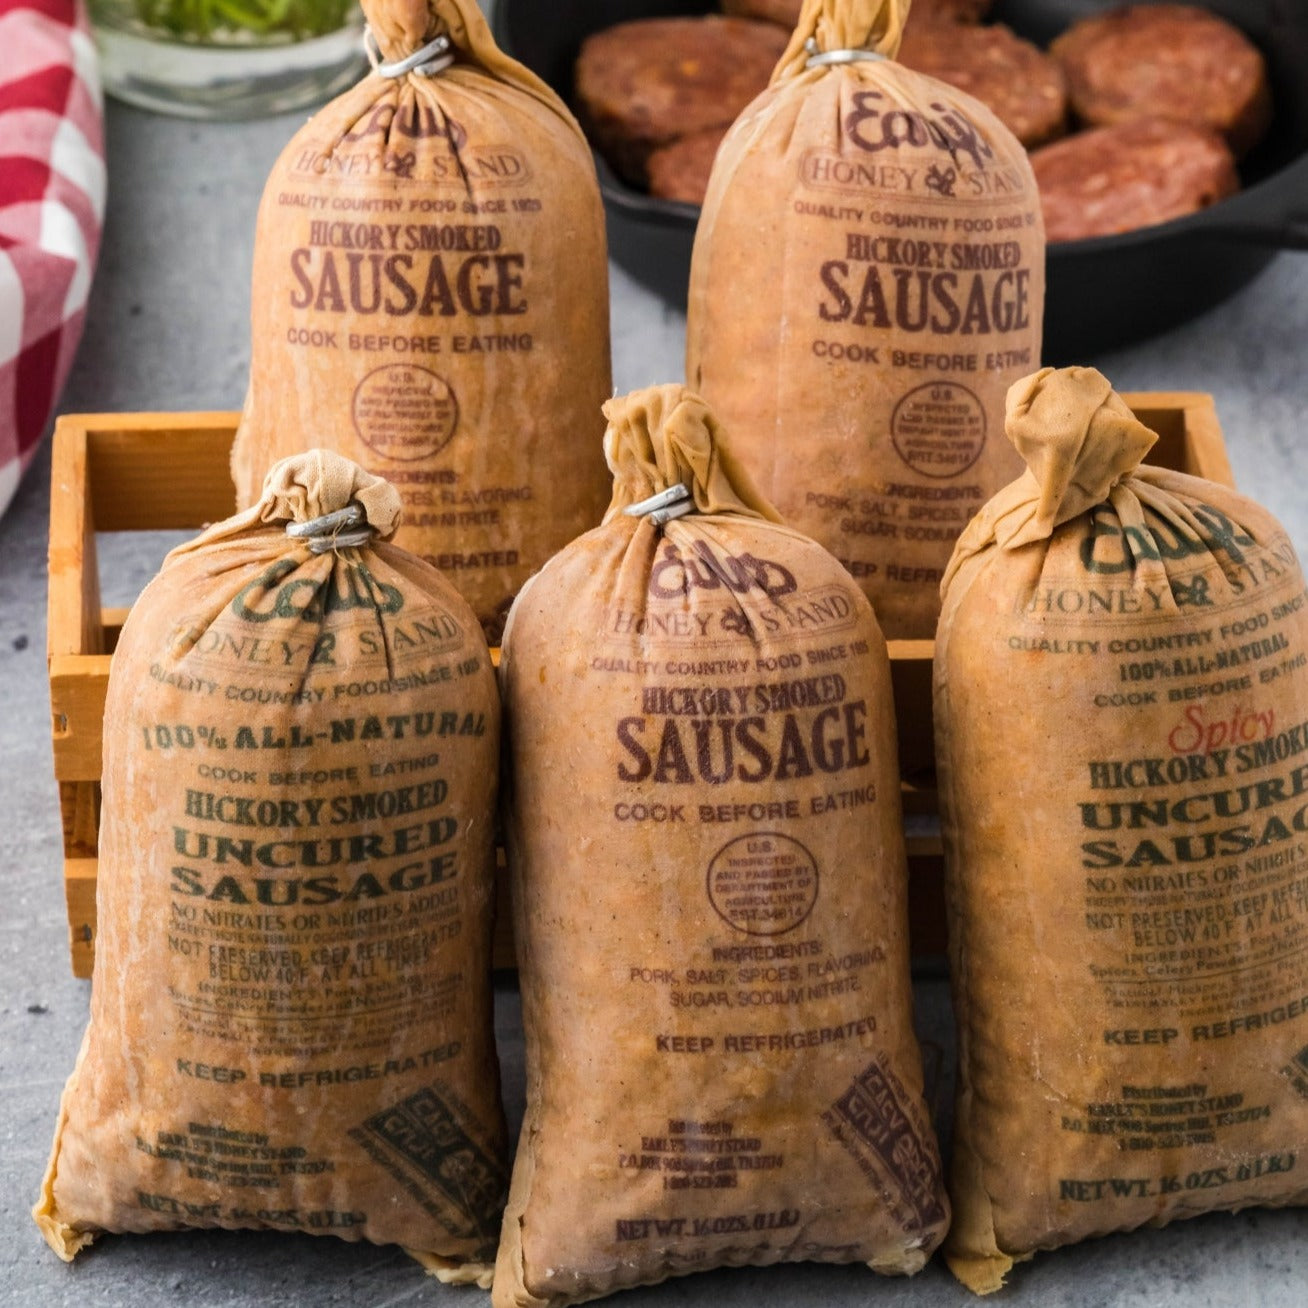 Gluten-free Breakfast Sausage trio - 3 delicious recipe options in 1-pound pokes: Original, Nitrate-Free, and Spicy Nitrate-Free. Premium quality Country Sausage made using time-honored techniques. Indulge in savory Breakfast Sausage packed with lean cuts of pork. Perfect for any occasion and conveniently packaged in easy-open stitch Poke Bags.